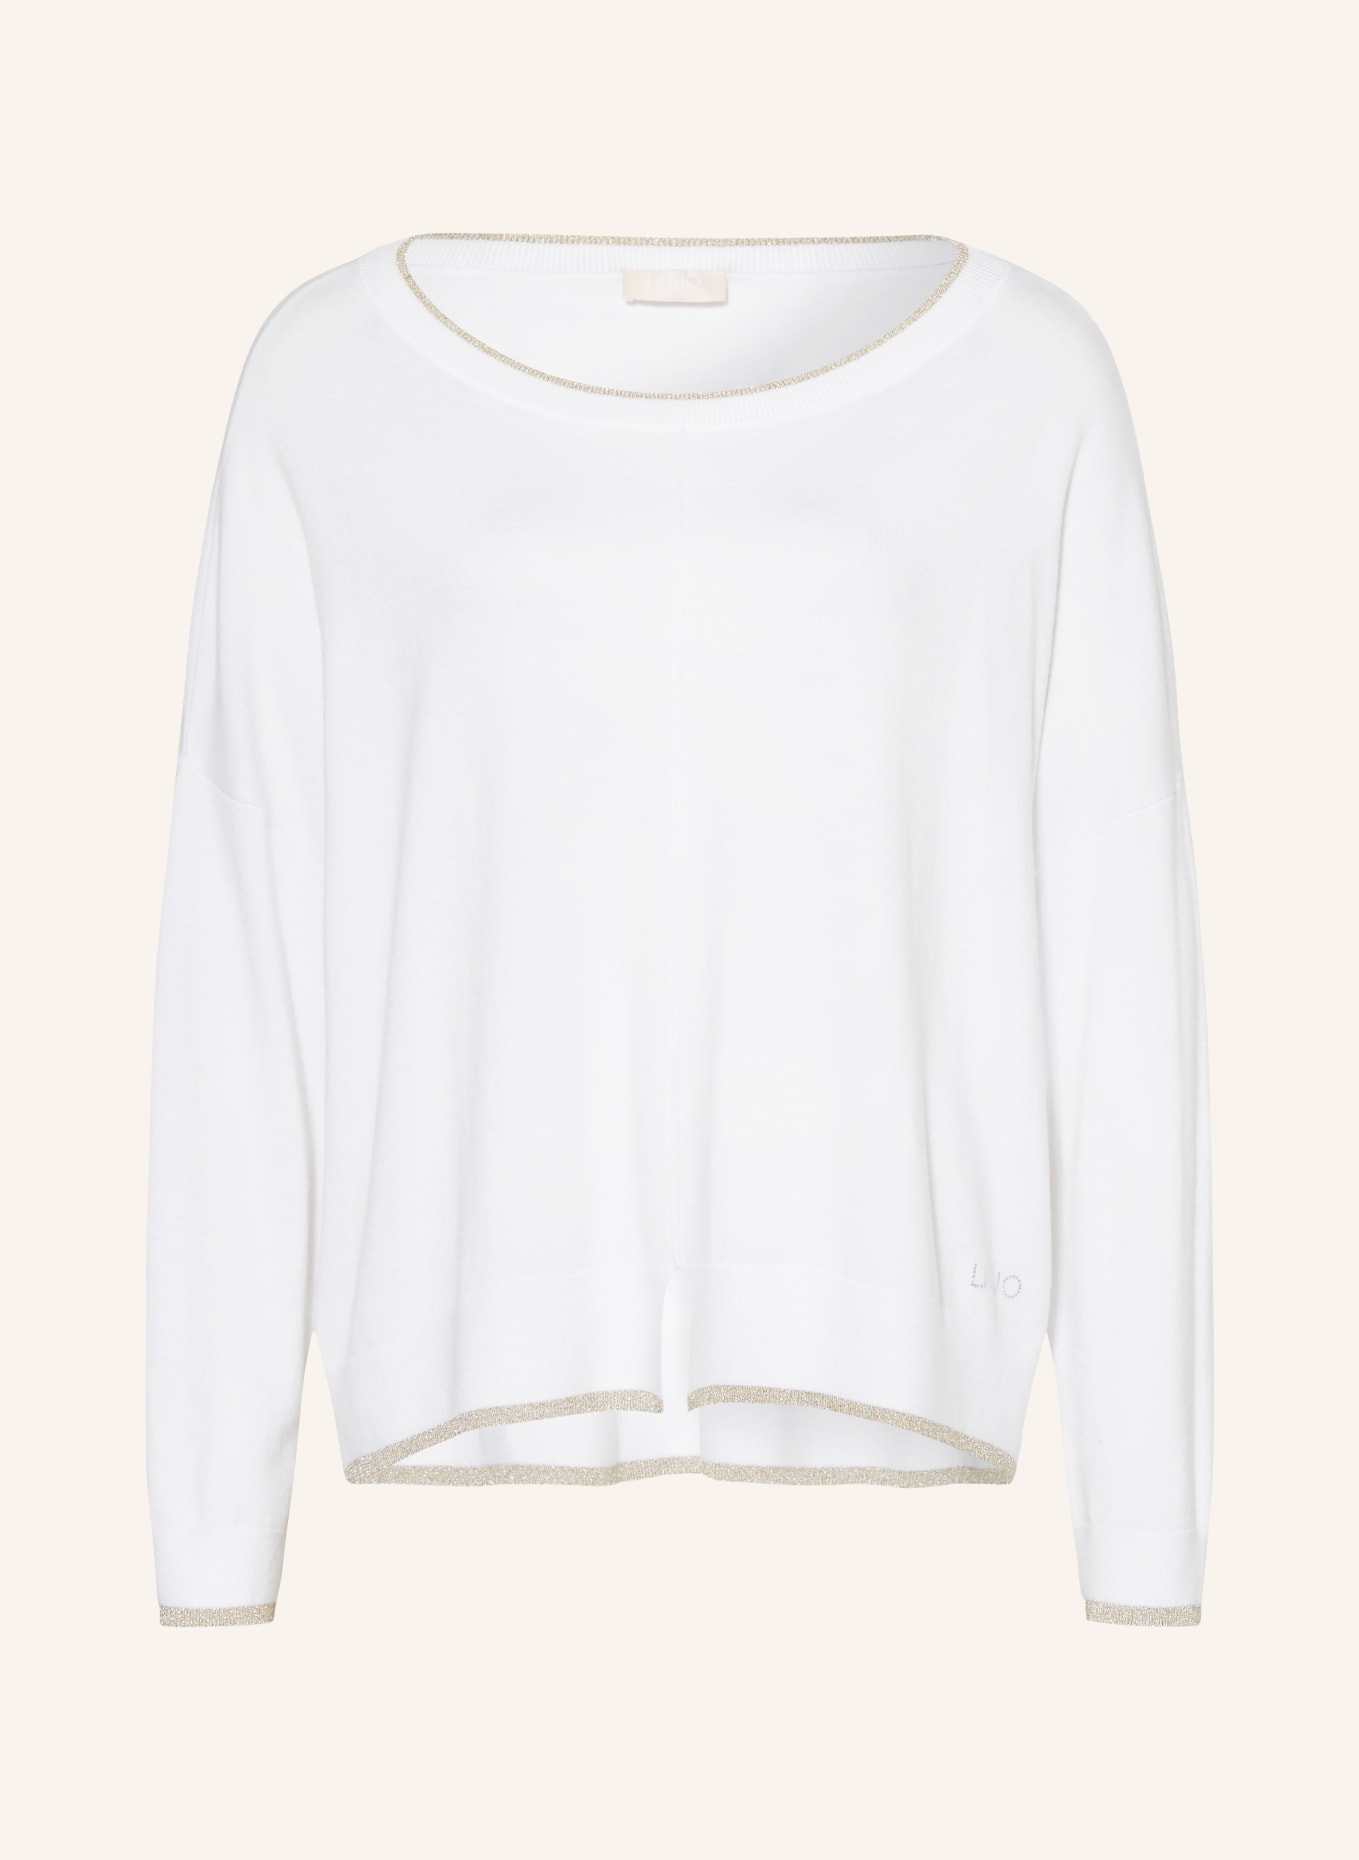 LIU JO Sweater with glitter thread and decorative gems, Color: WHITE (Image 1)